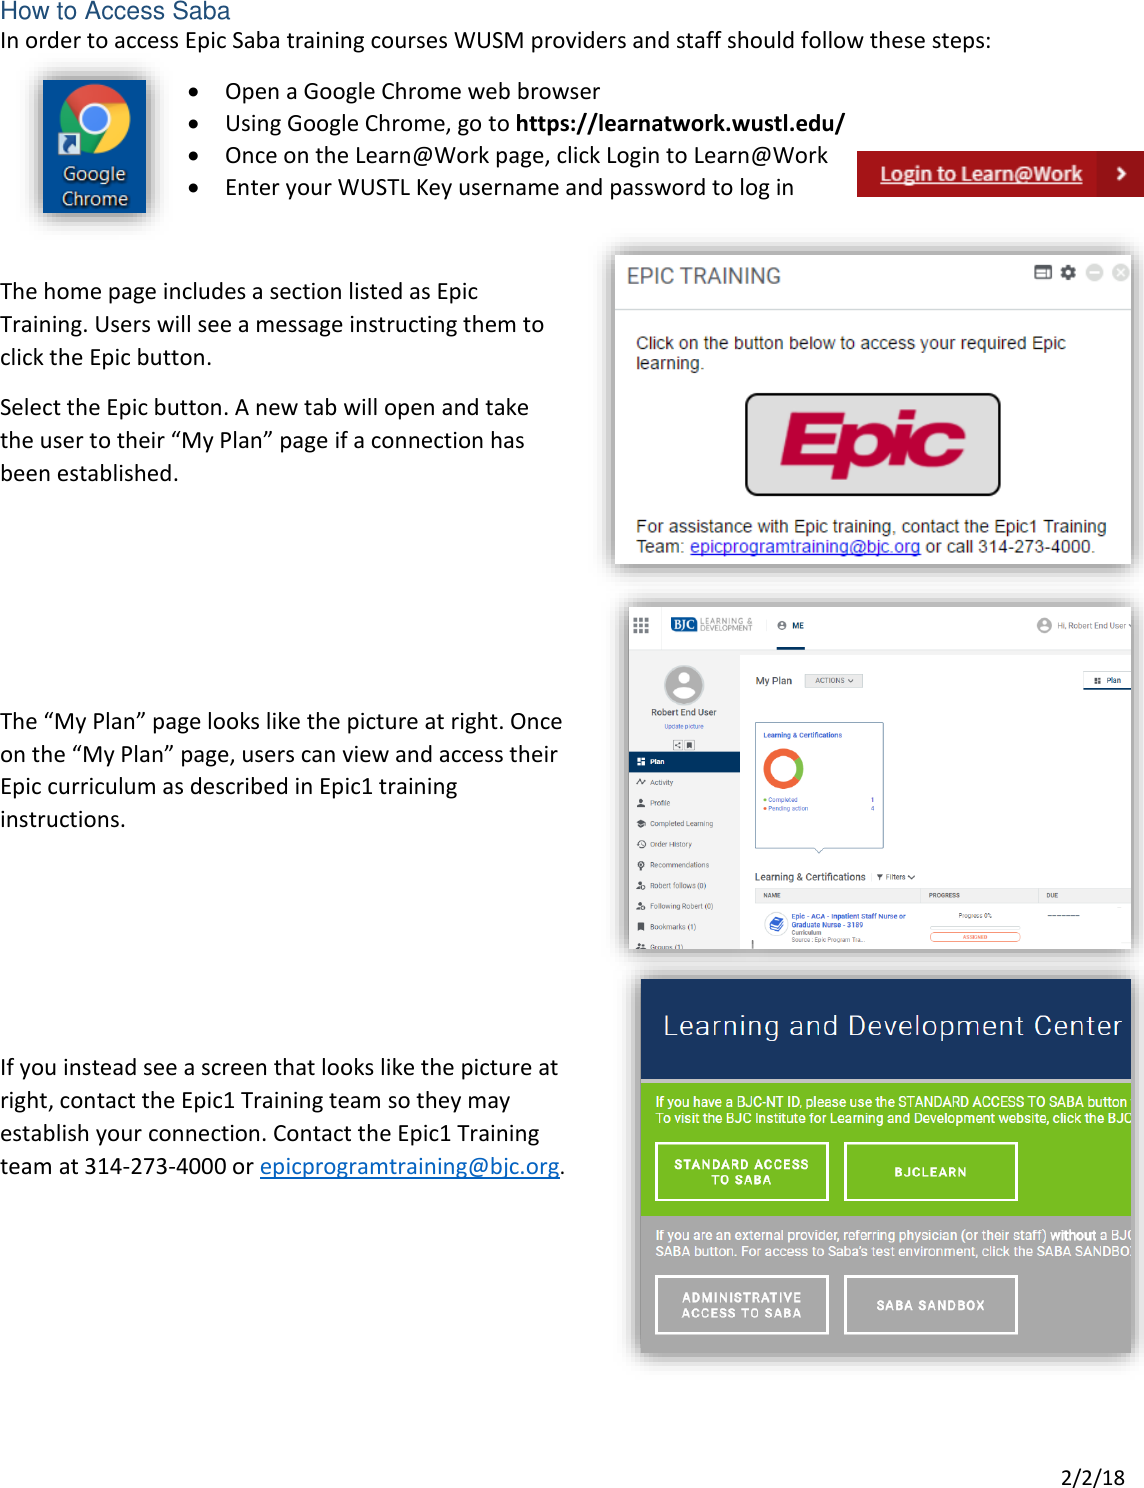 Page 1 of 7 - WU Epic Provider Guide - E-Learning Only